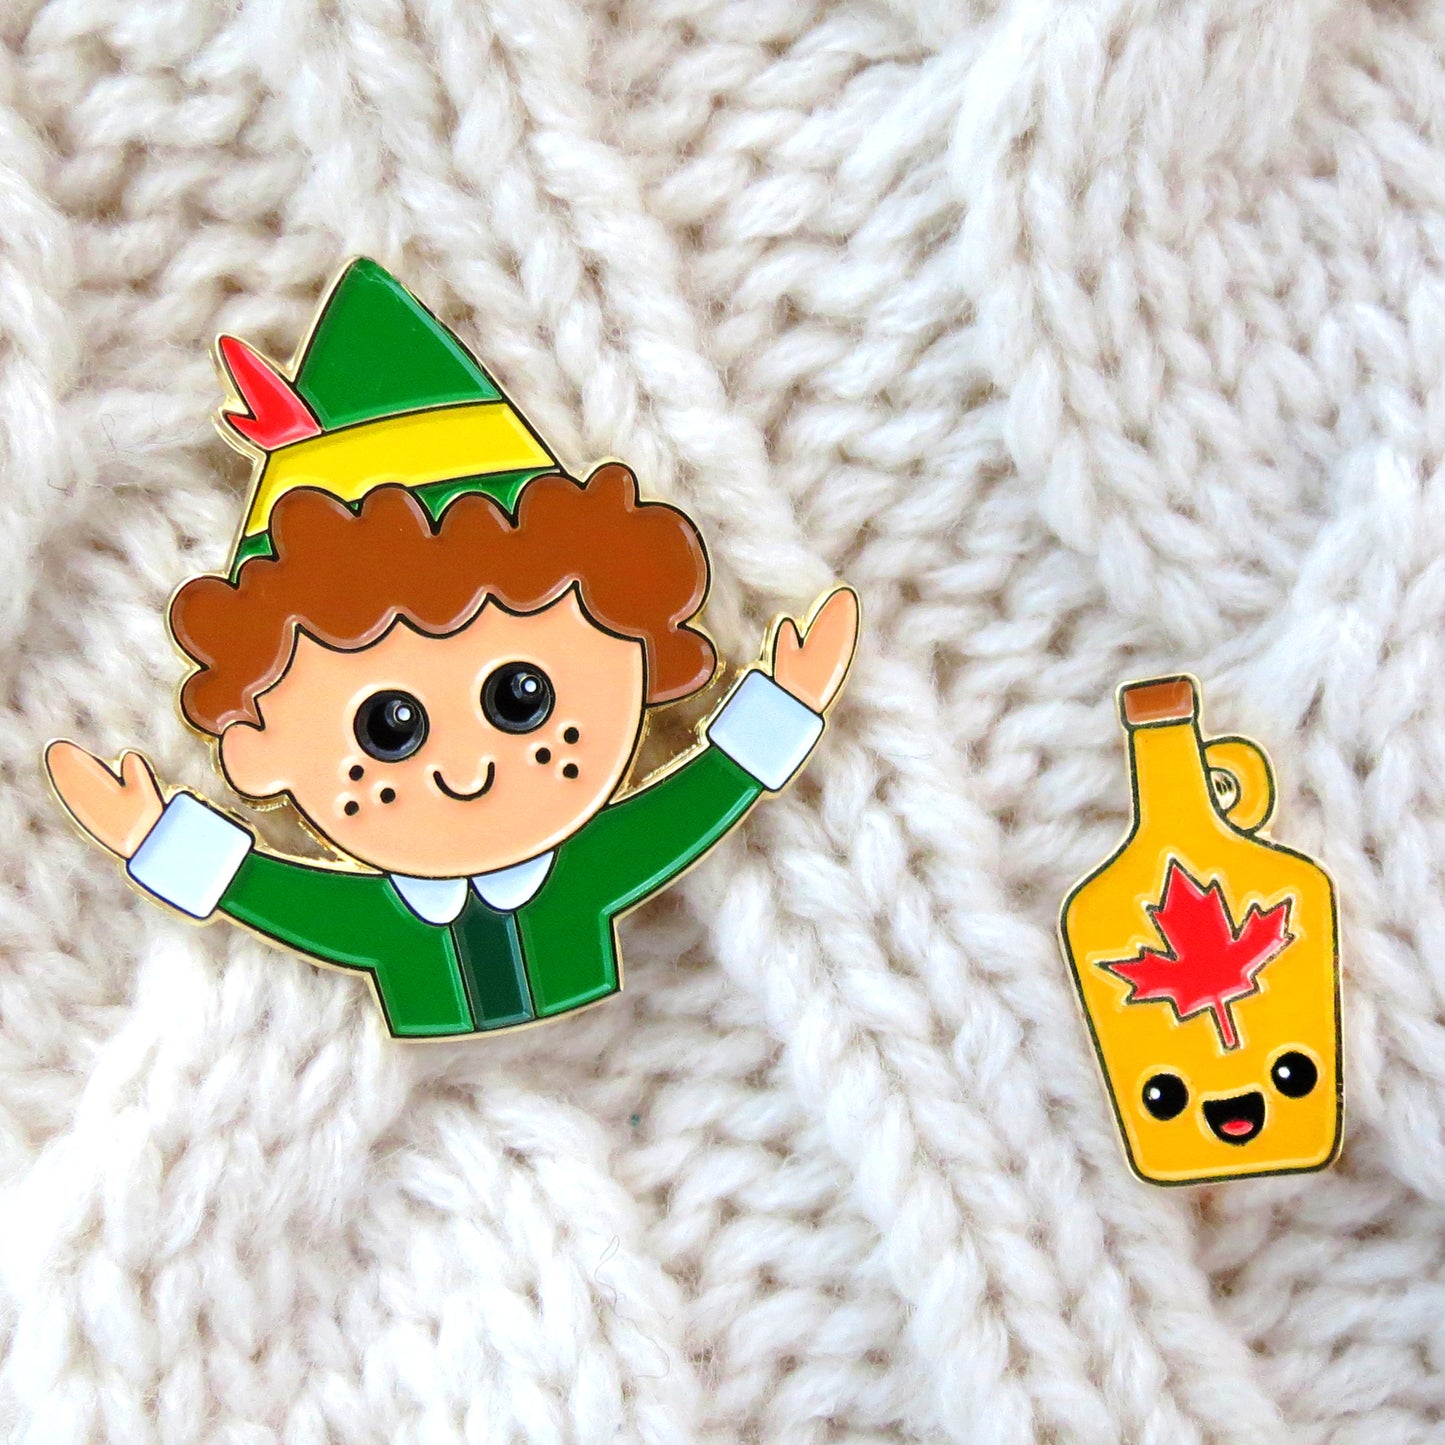 Buddy the Elf and Maple Syrup enamel pin set on cream color knitted sweater